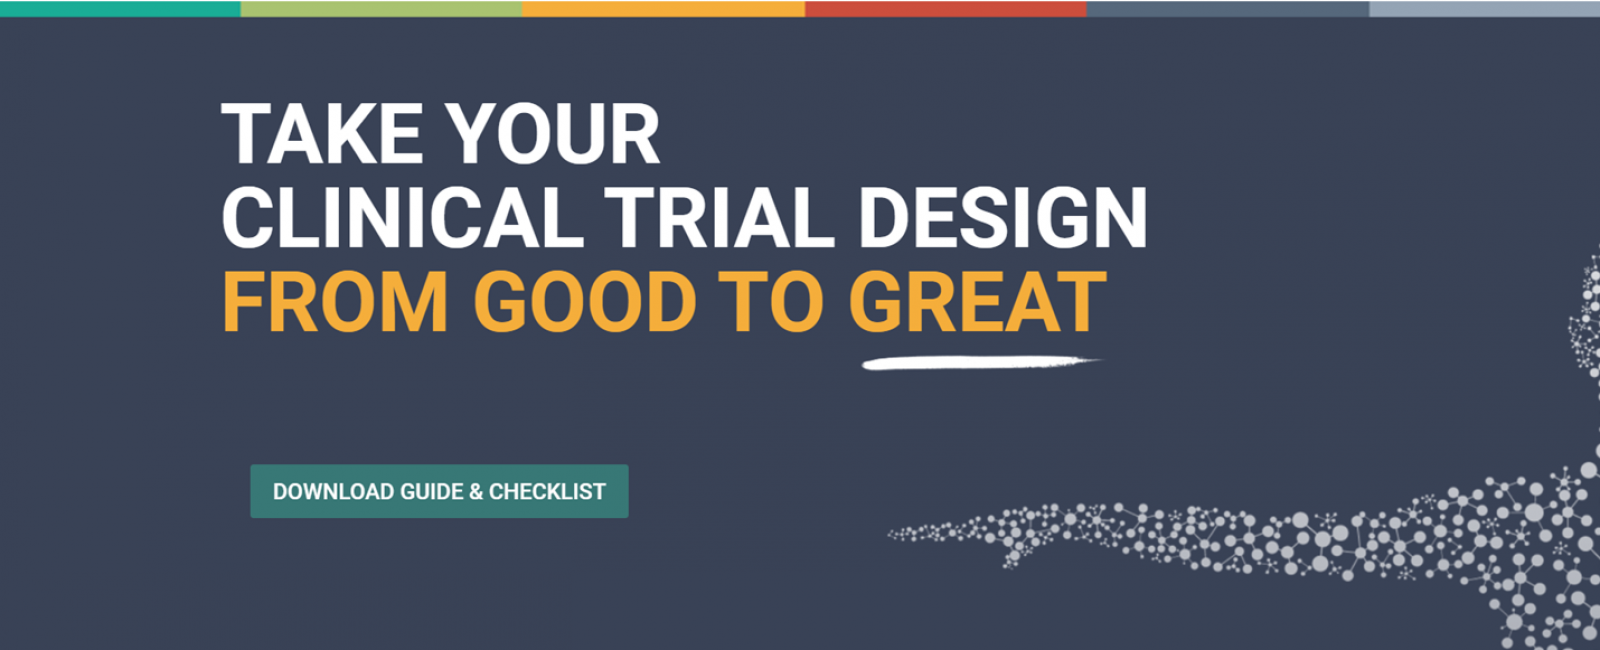 Take Your Clinical Trial Design from Good to Great